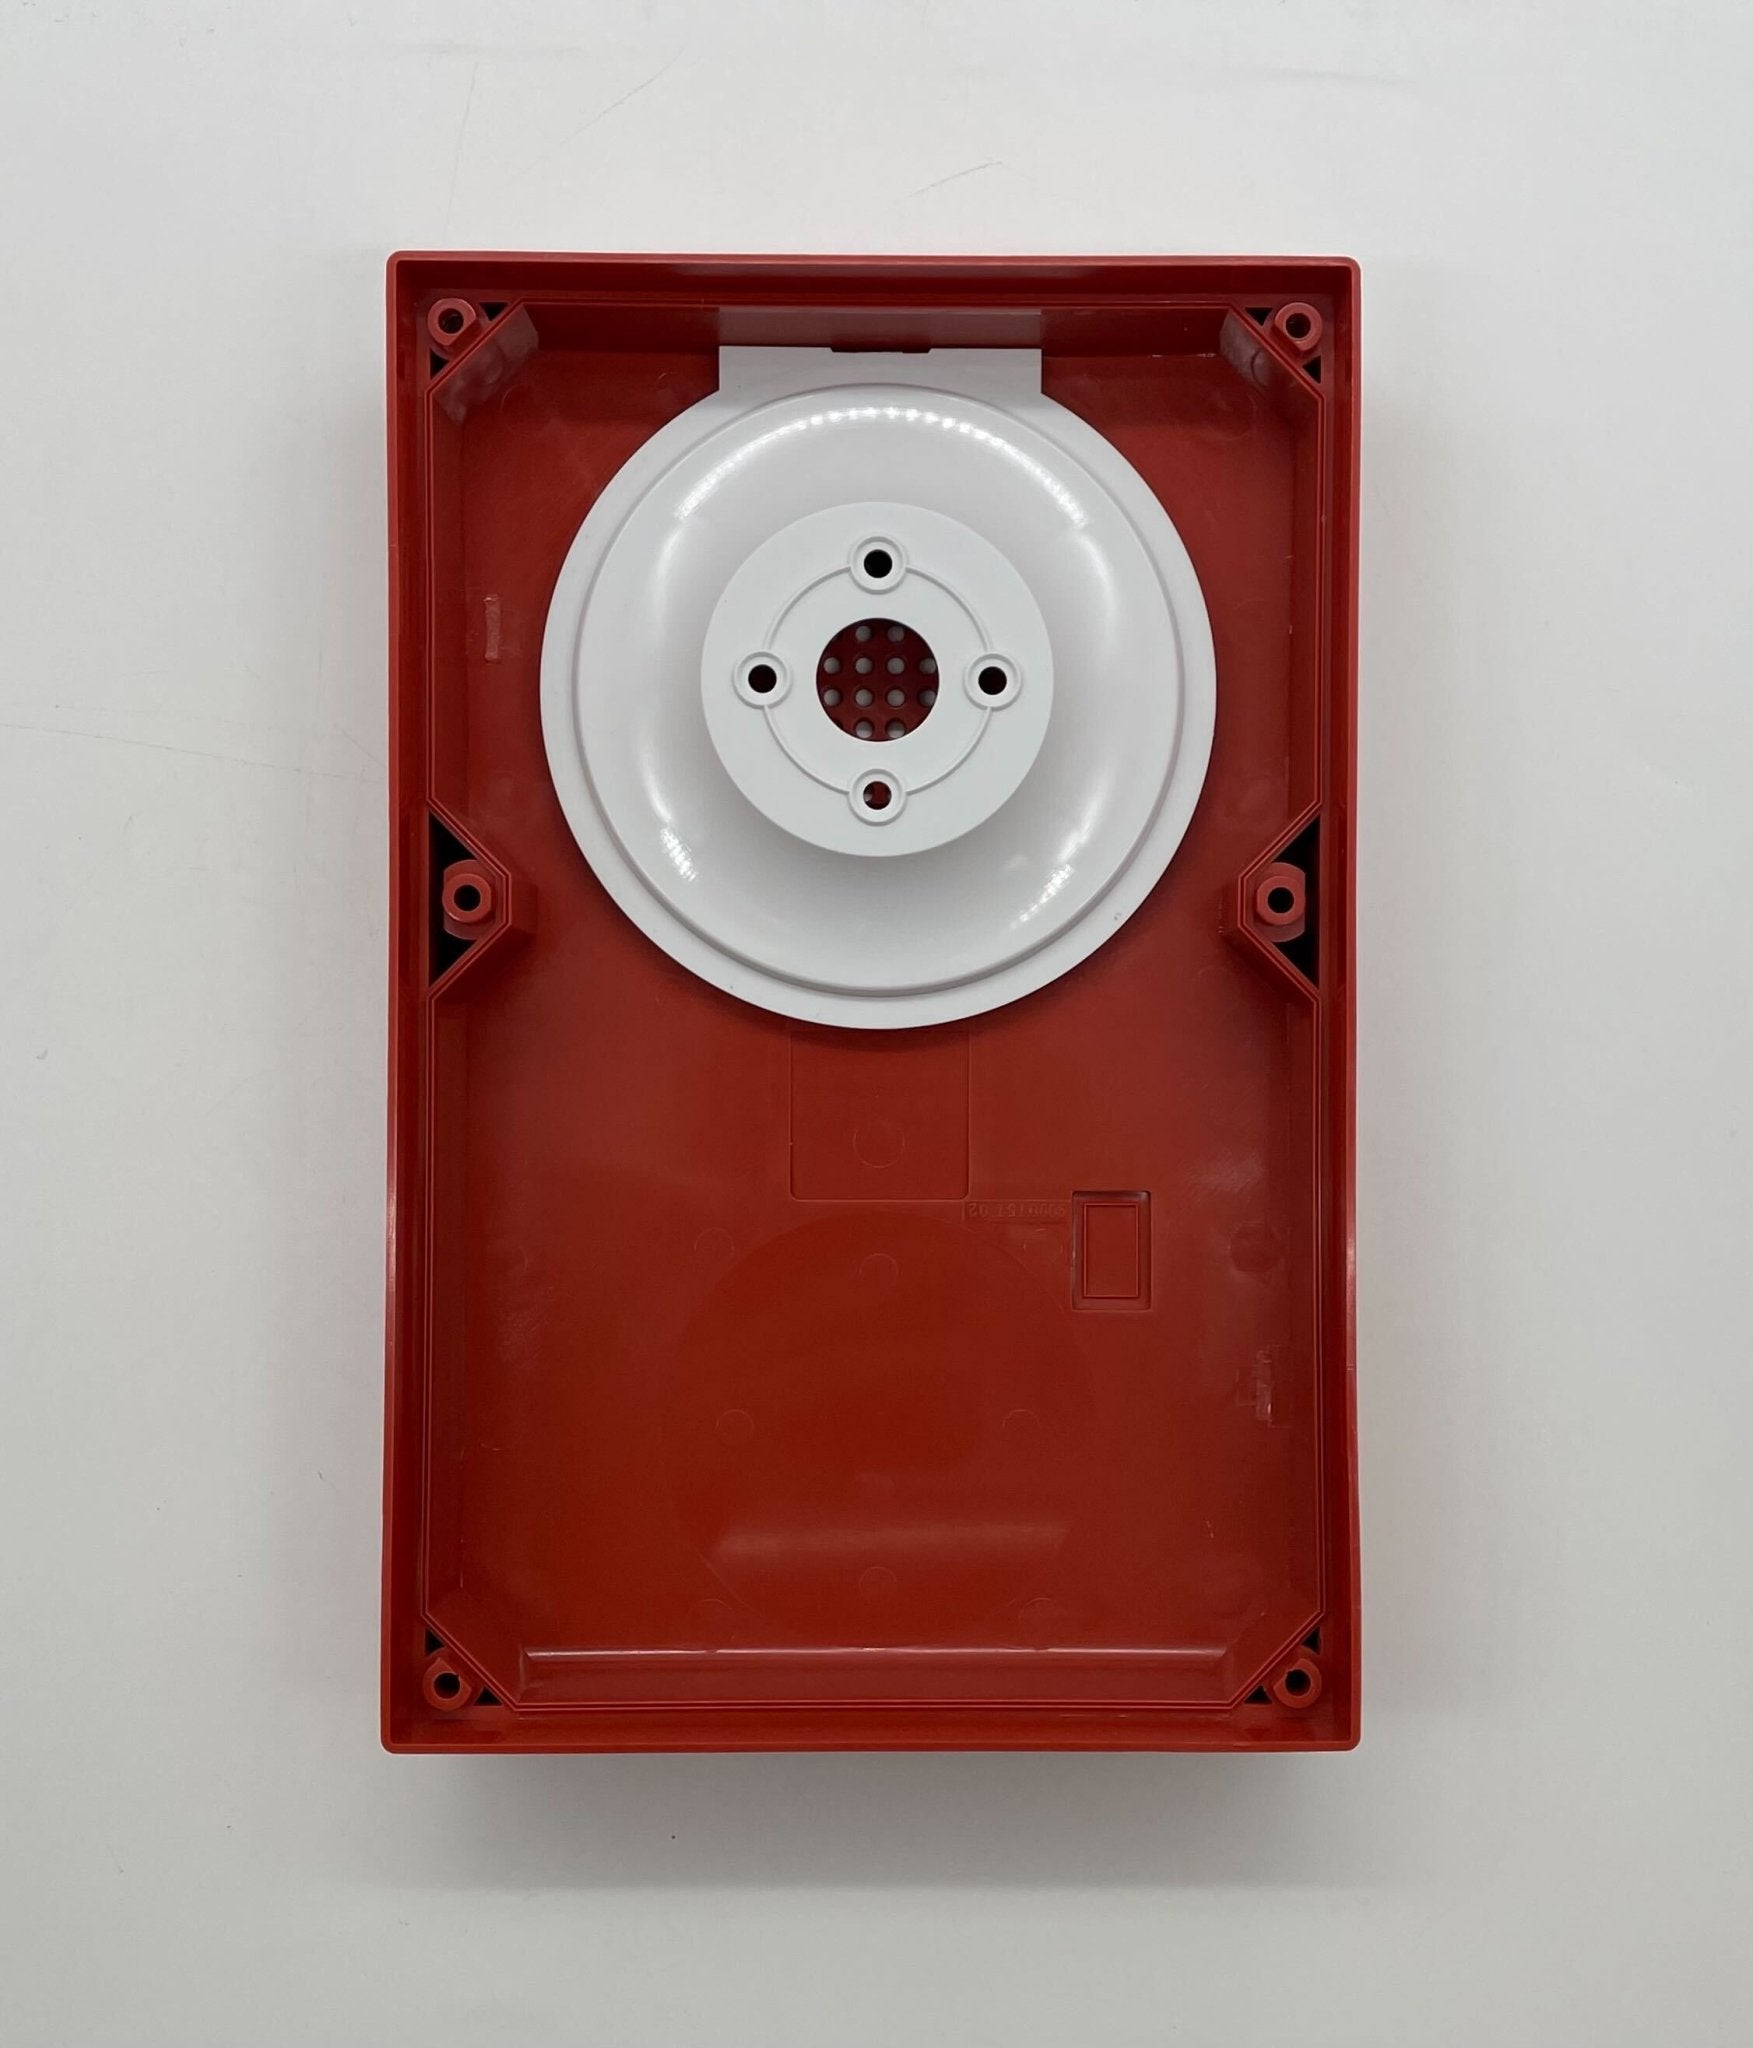 Edwards WG4RN-H - The Fire Alarm Supplier